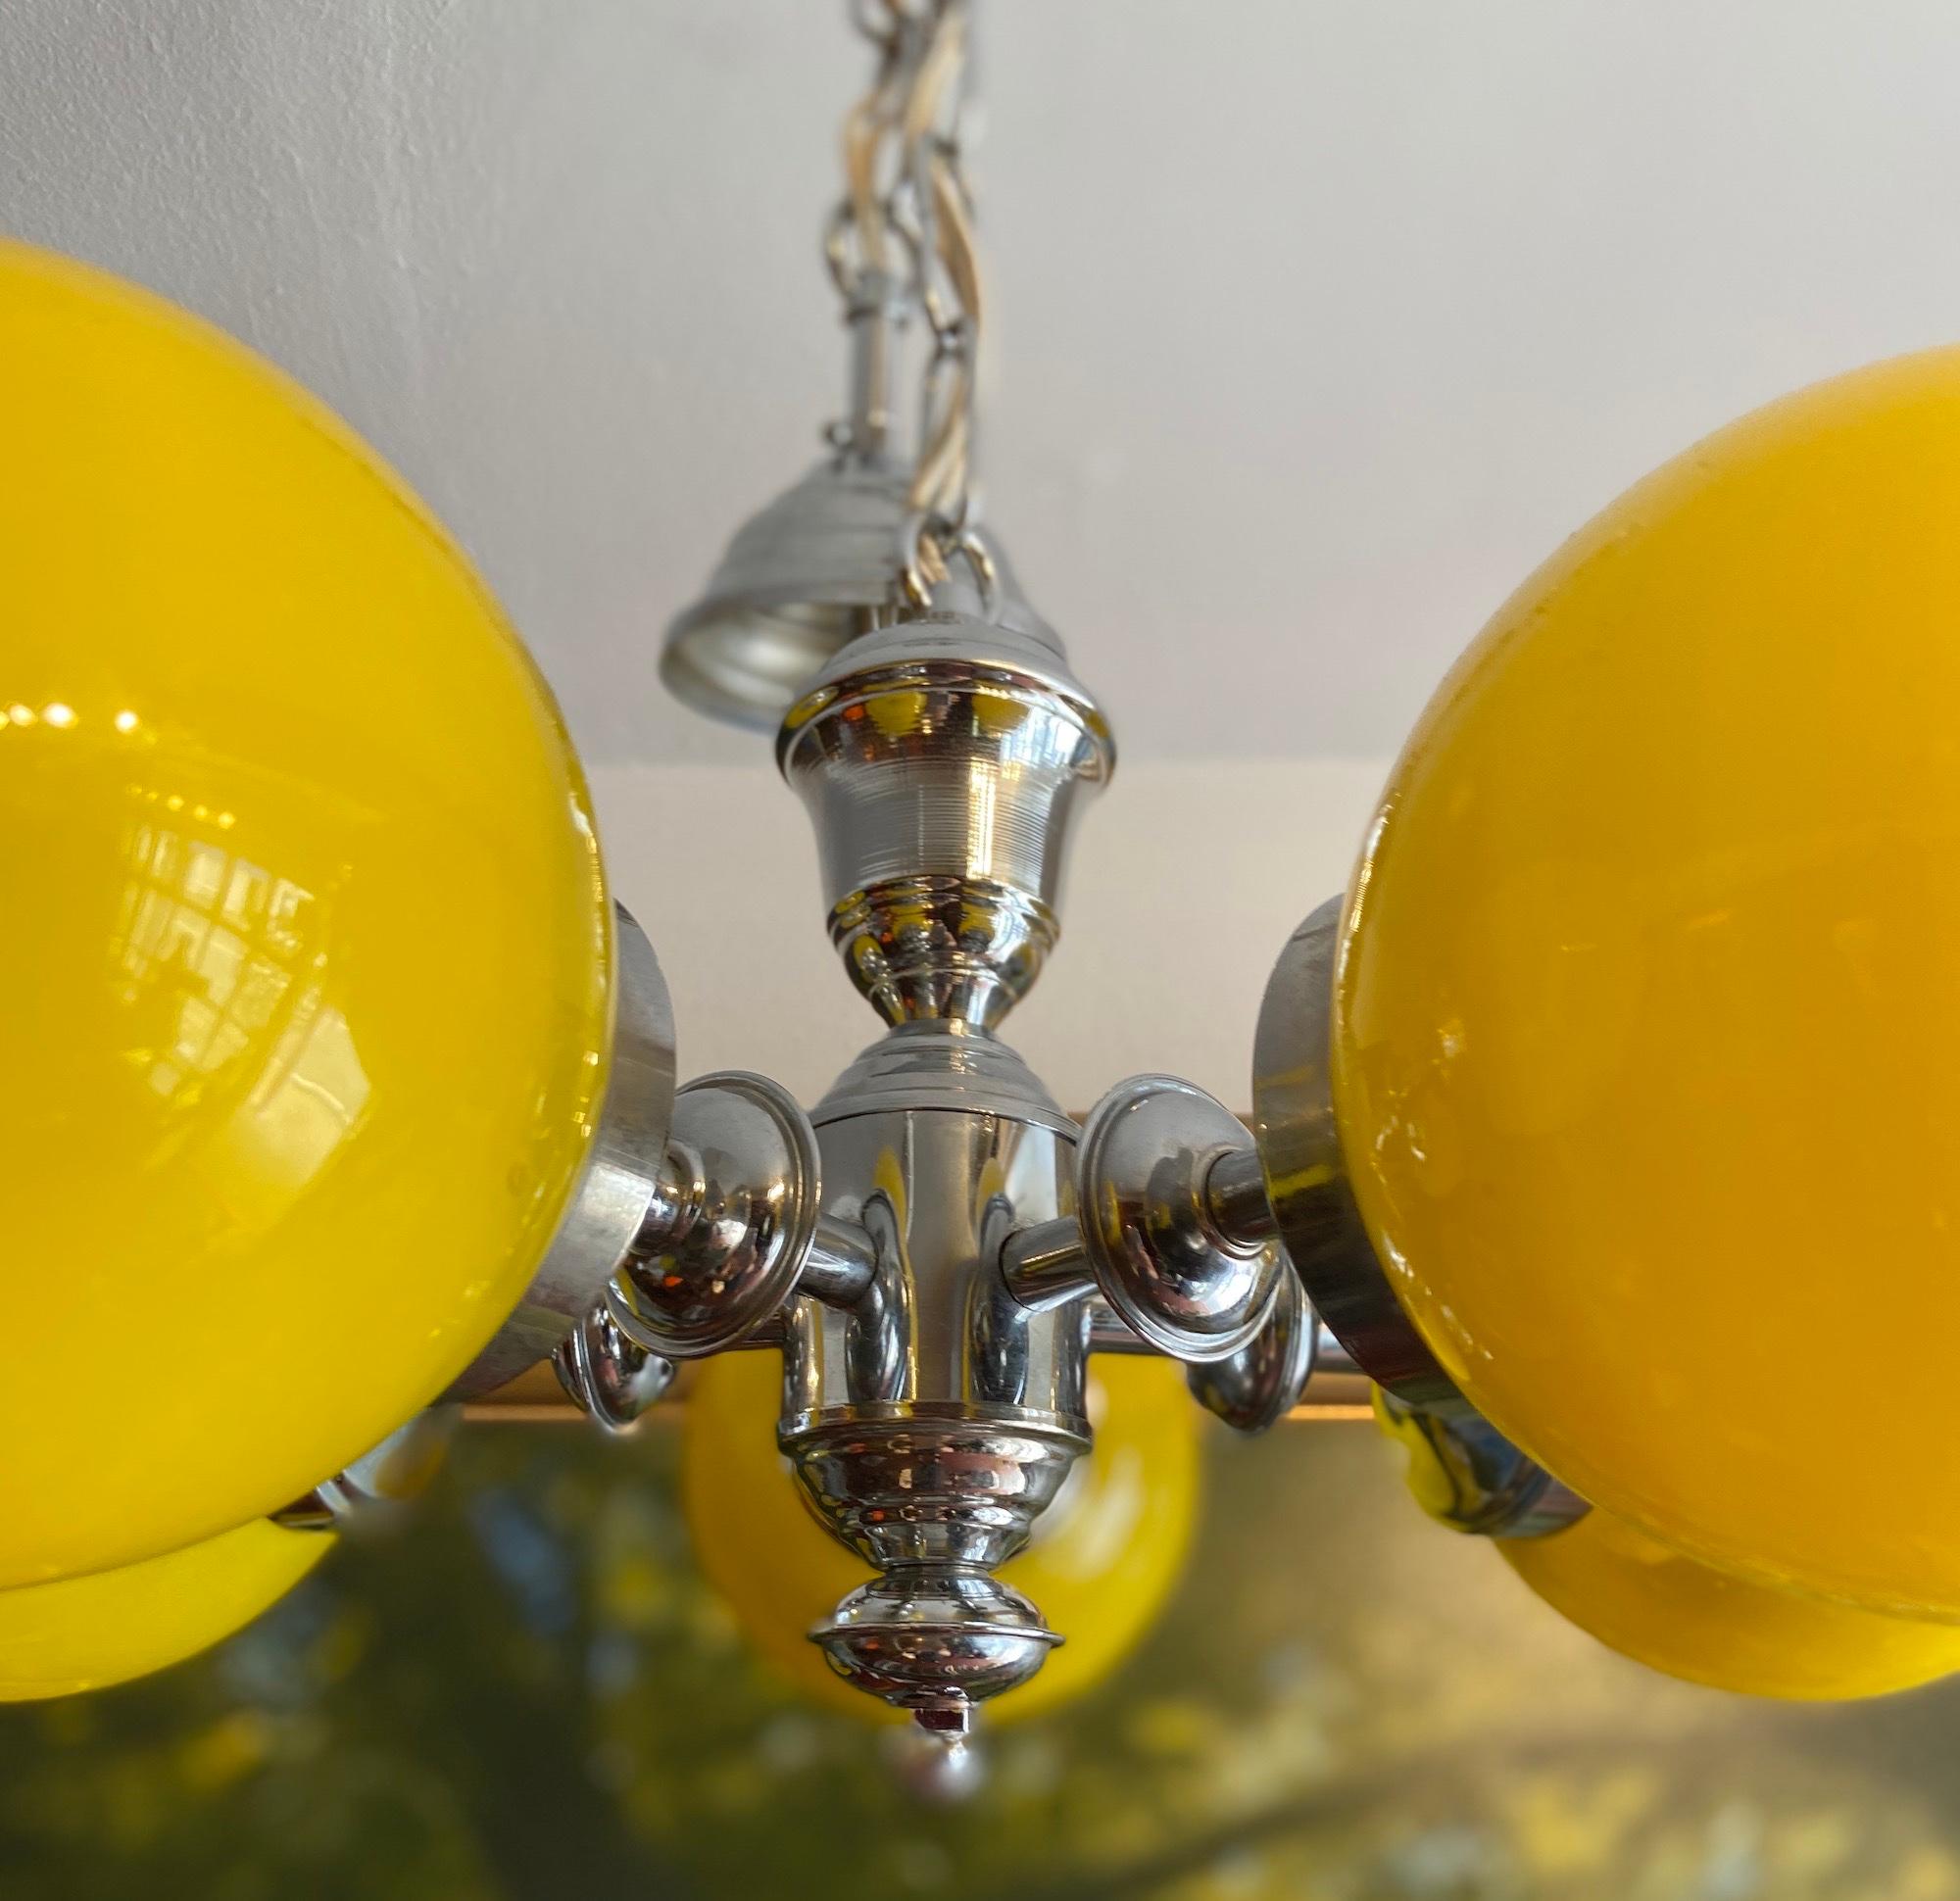 A striking midcentury Italian designed pendant hanging light. 

The yellow round shades look vibrant against the chrome finish

Measures: 40 cm diameter.
  